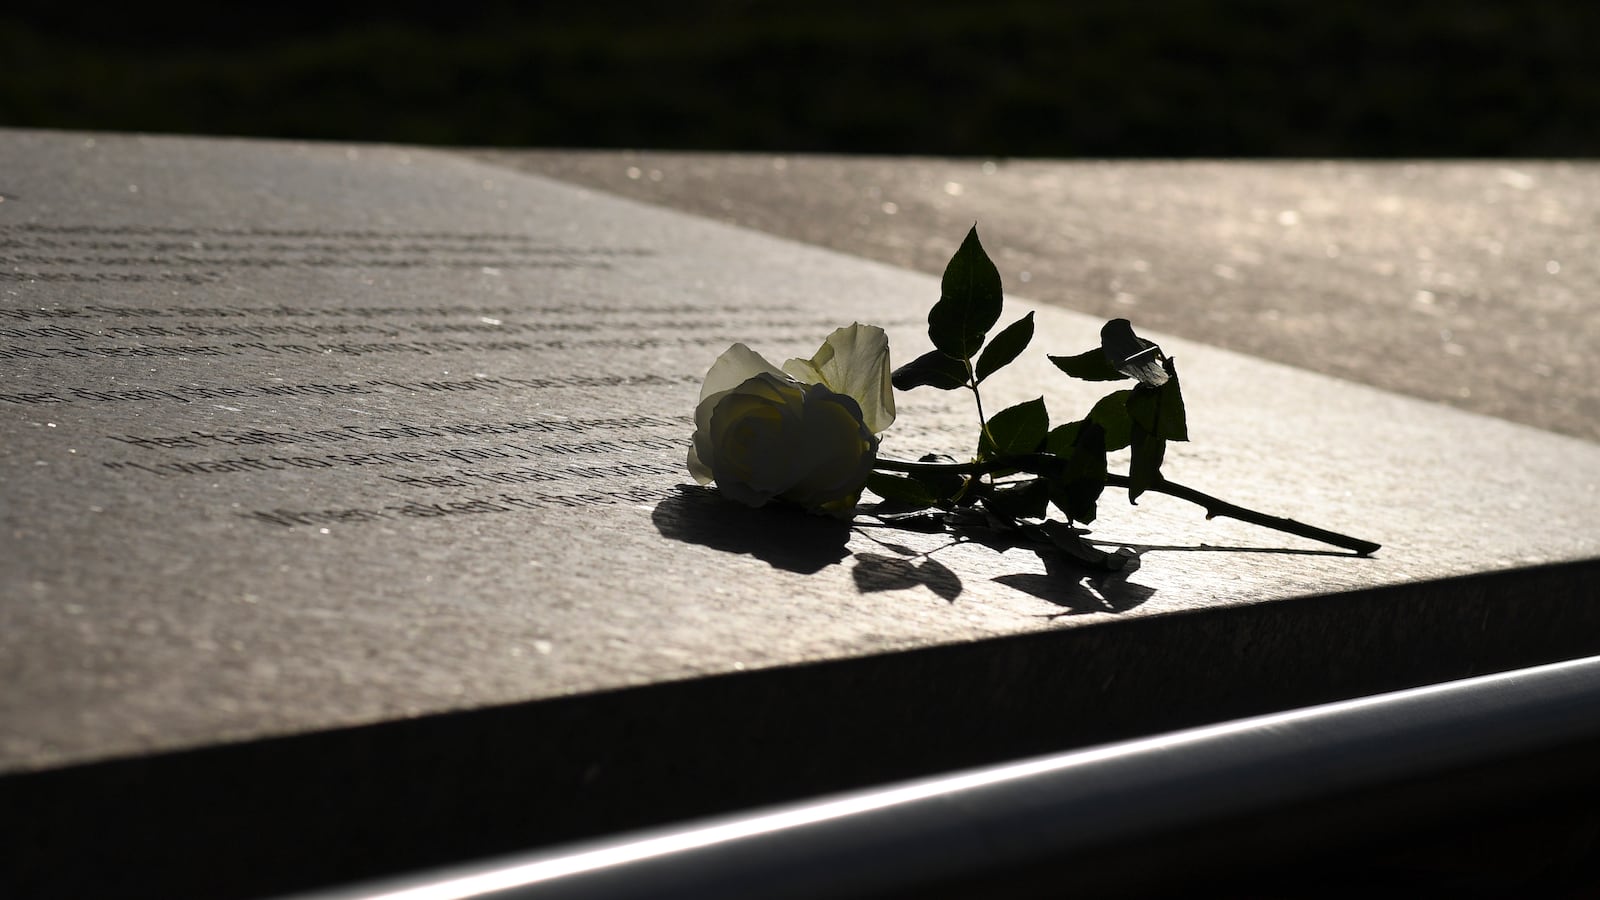 LITTLETON CO - APRIL 17: A flower is left at the Columbine Memorial on April 17, 2019 in Littleton, Colorado. Districts across the Denver metro were then closed schools as the FBI and local police searched for 18-year-old Sol Pais, a woman from Florida suspected of making threats.